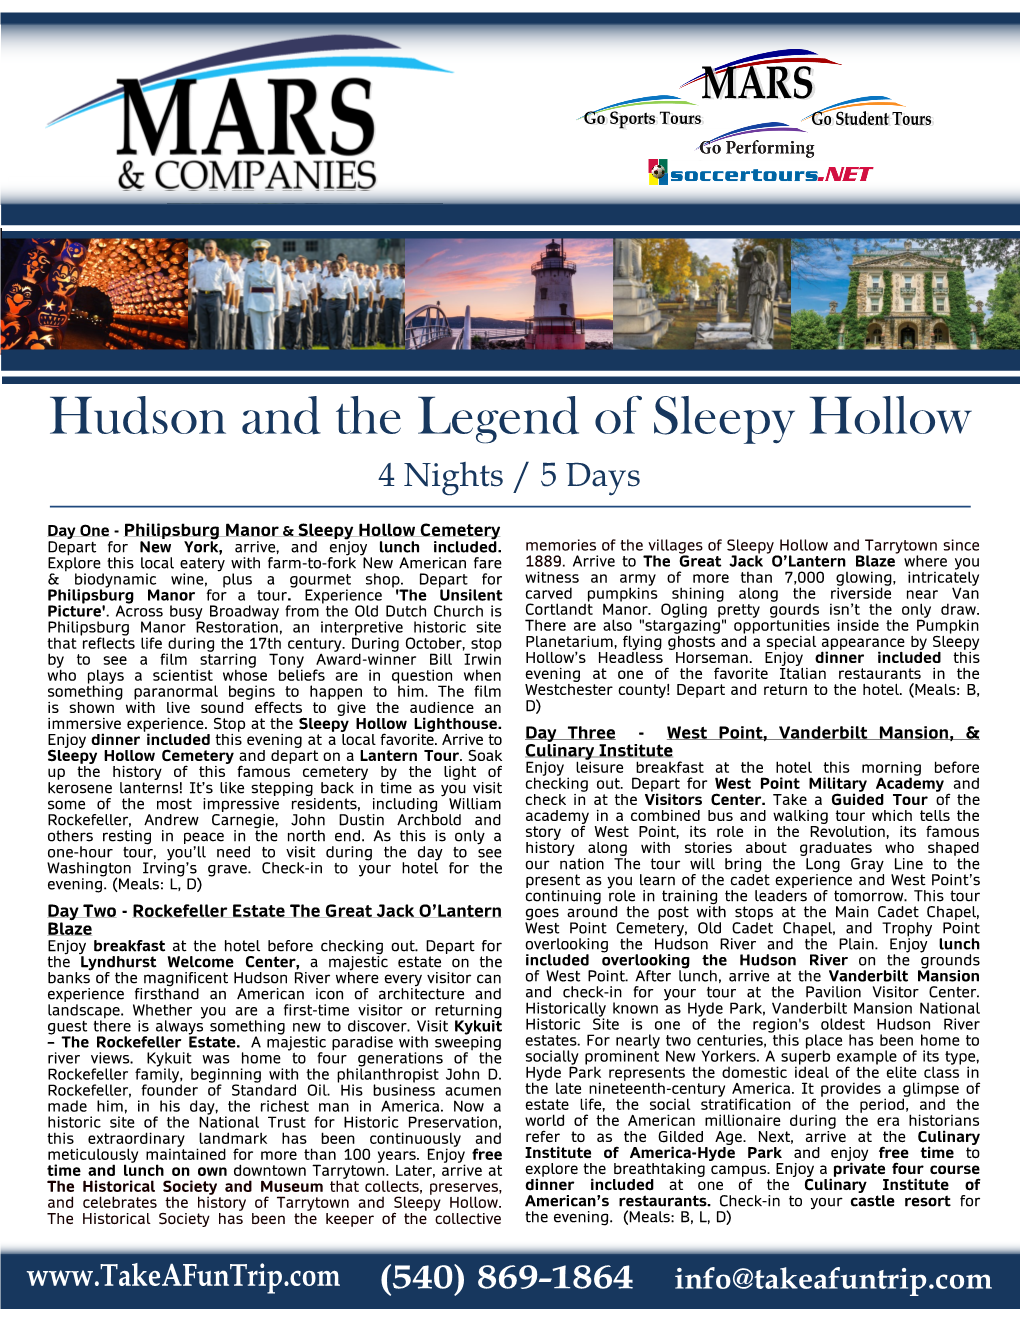 Hudson and the Legend of Sleepy Hollow 4 Nights / 5 Days